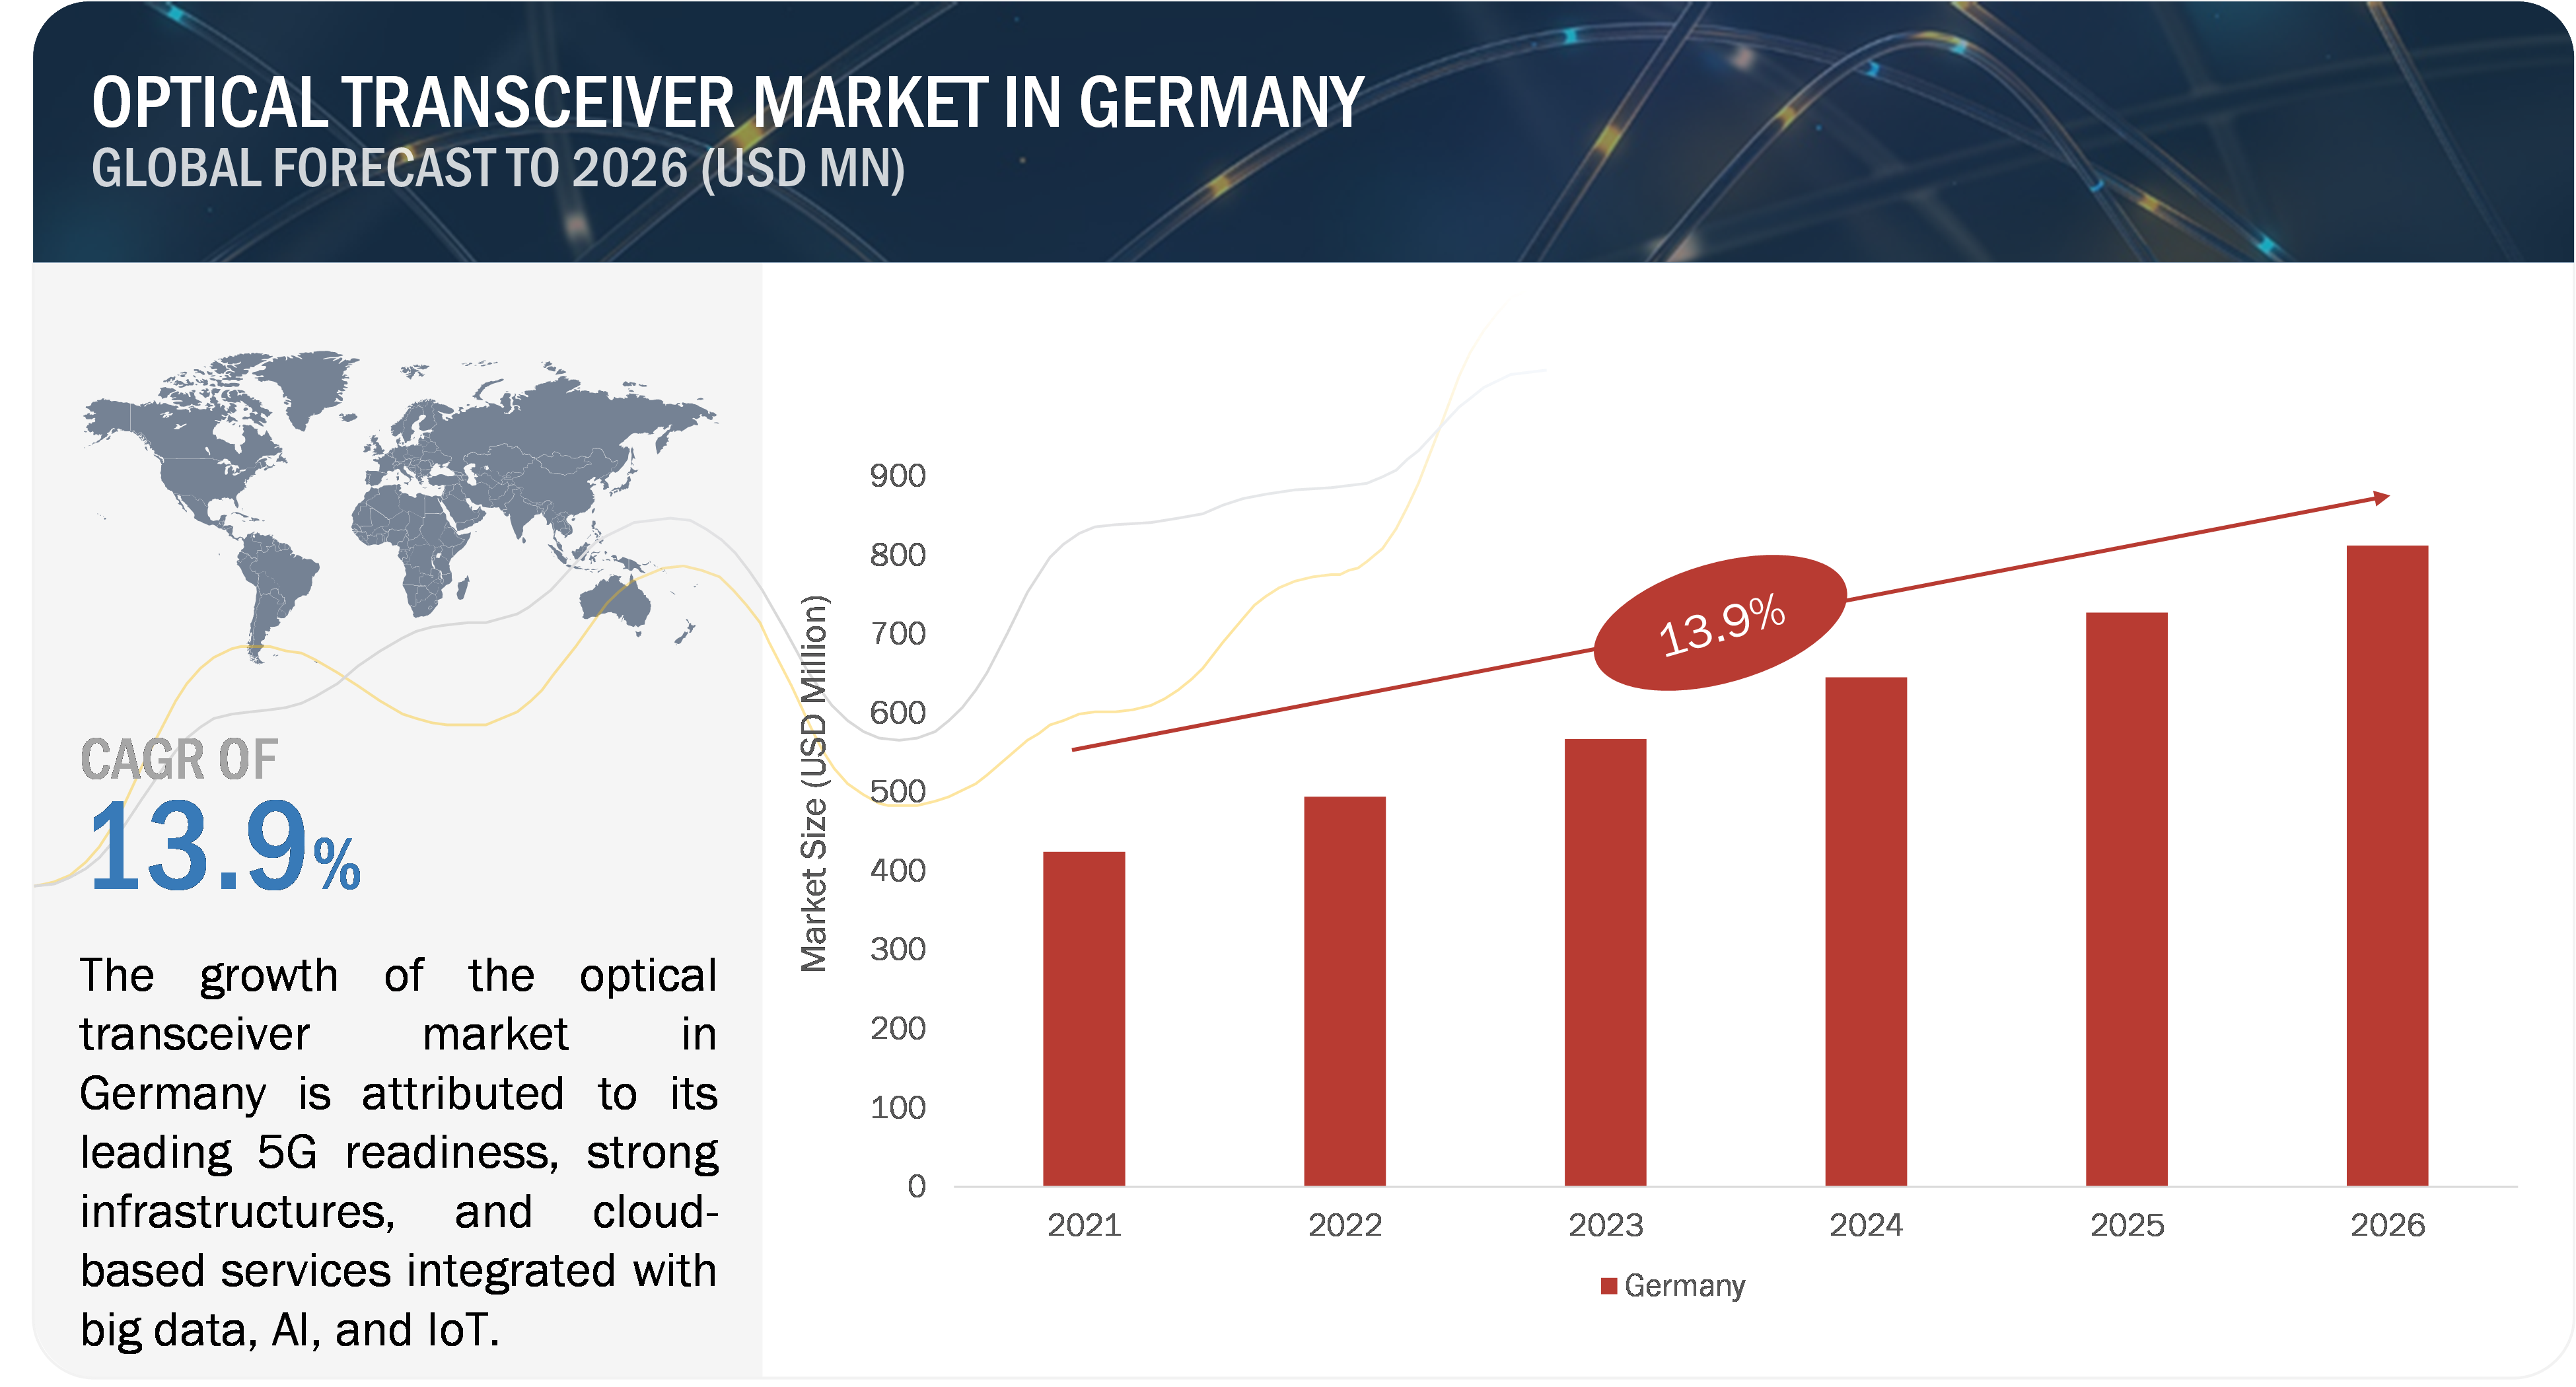 Optical Transceiver Market Growth In Germany